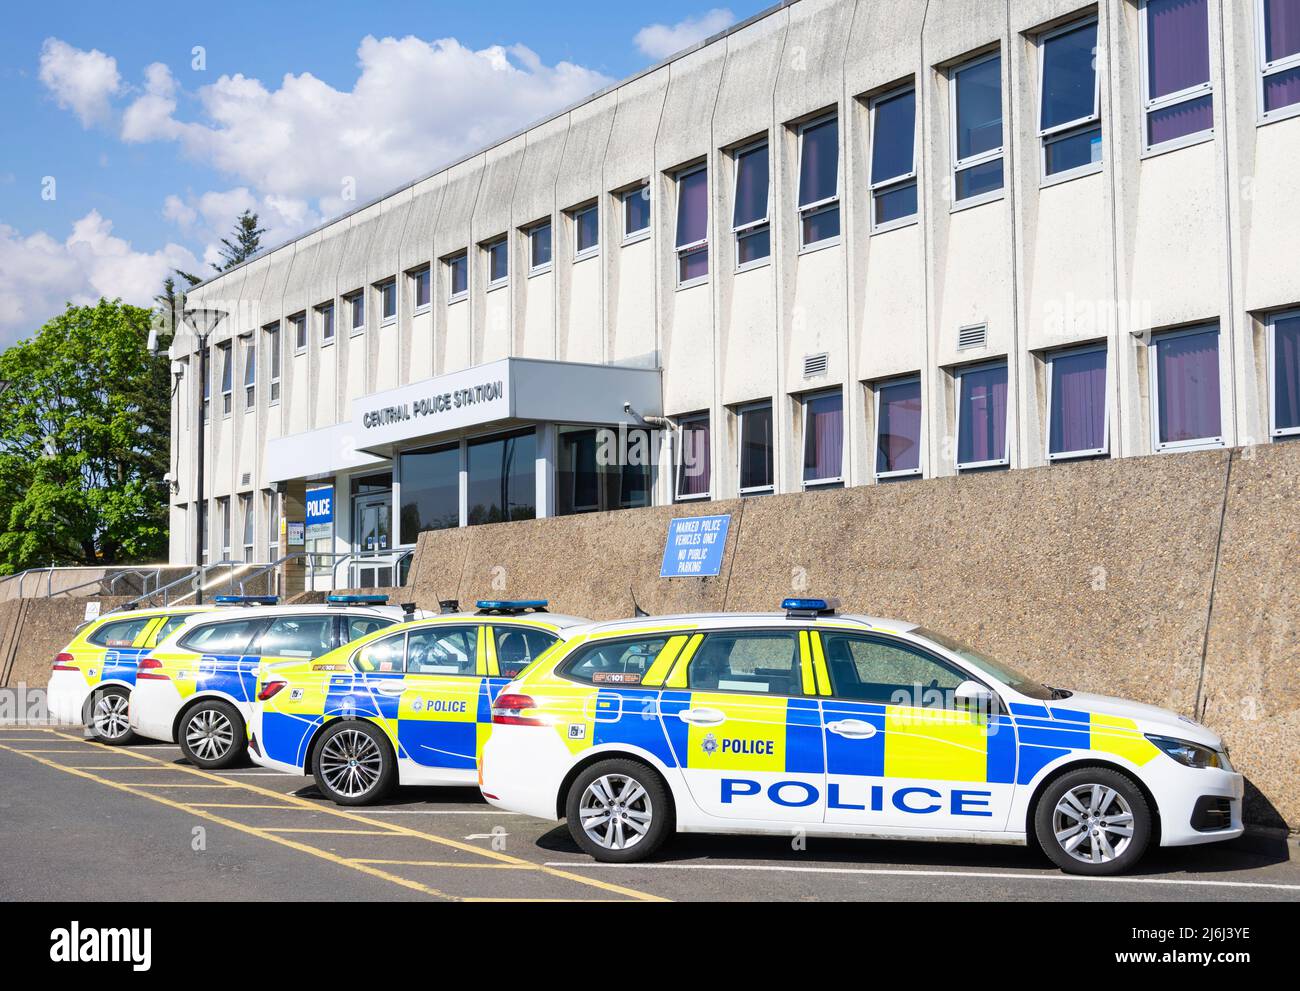 Police station exterior with police cars parked outside UK GB Europe Stock Photo